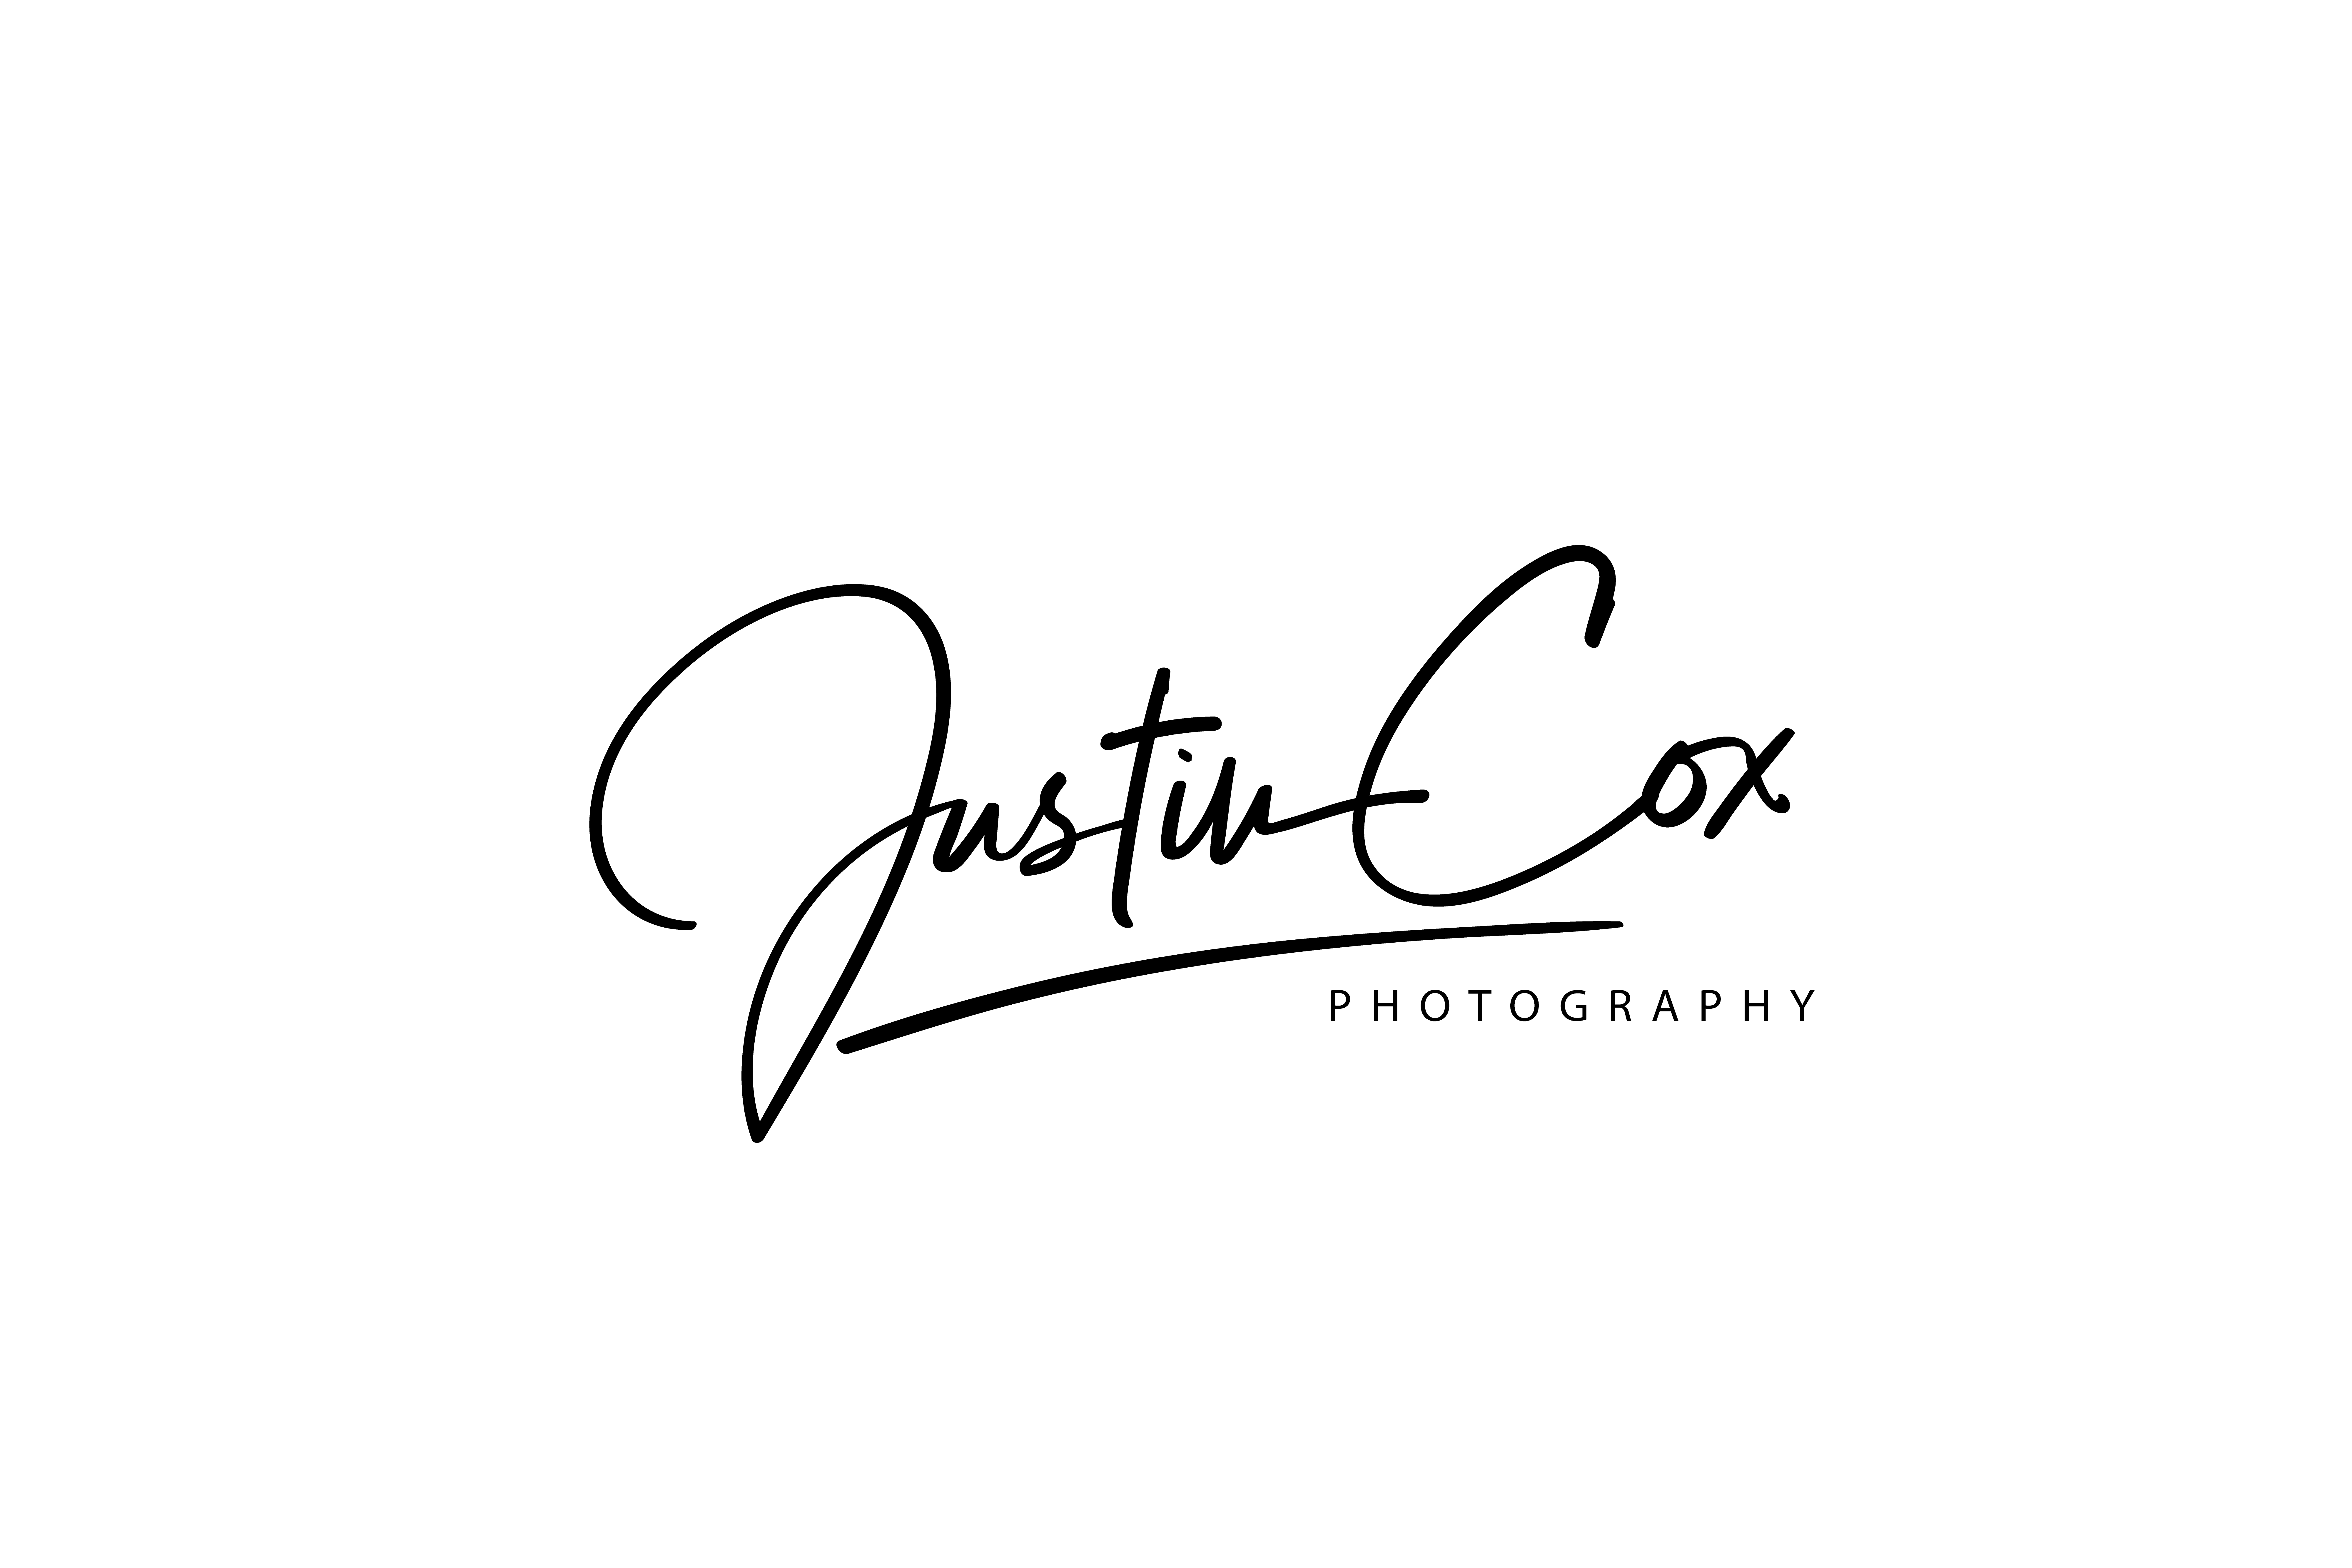 Justin Cox Photography